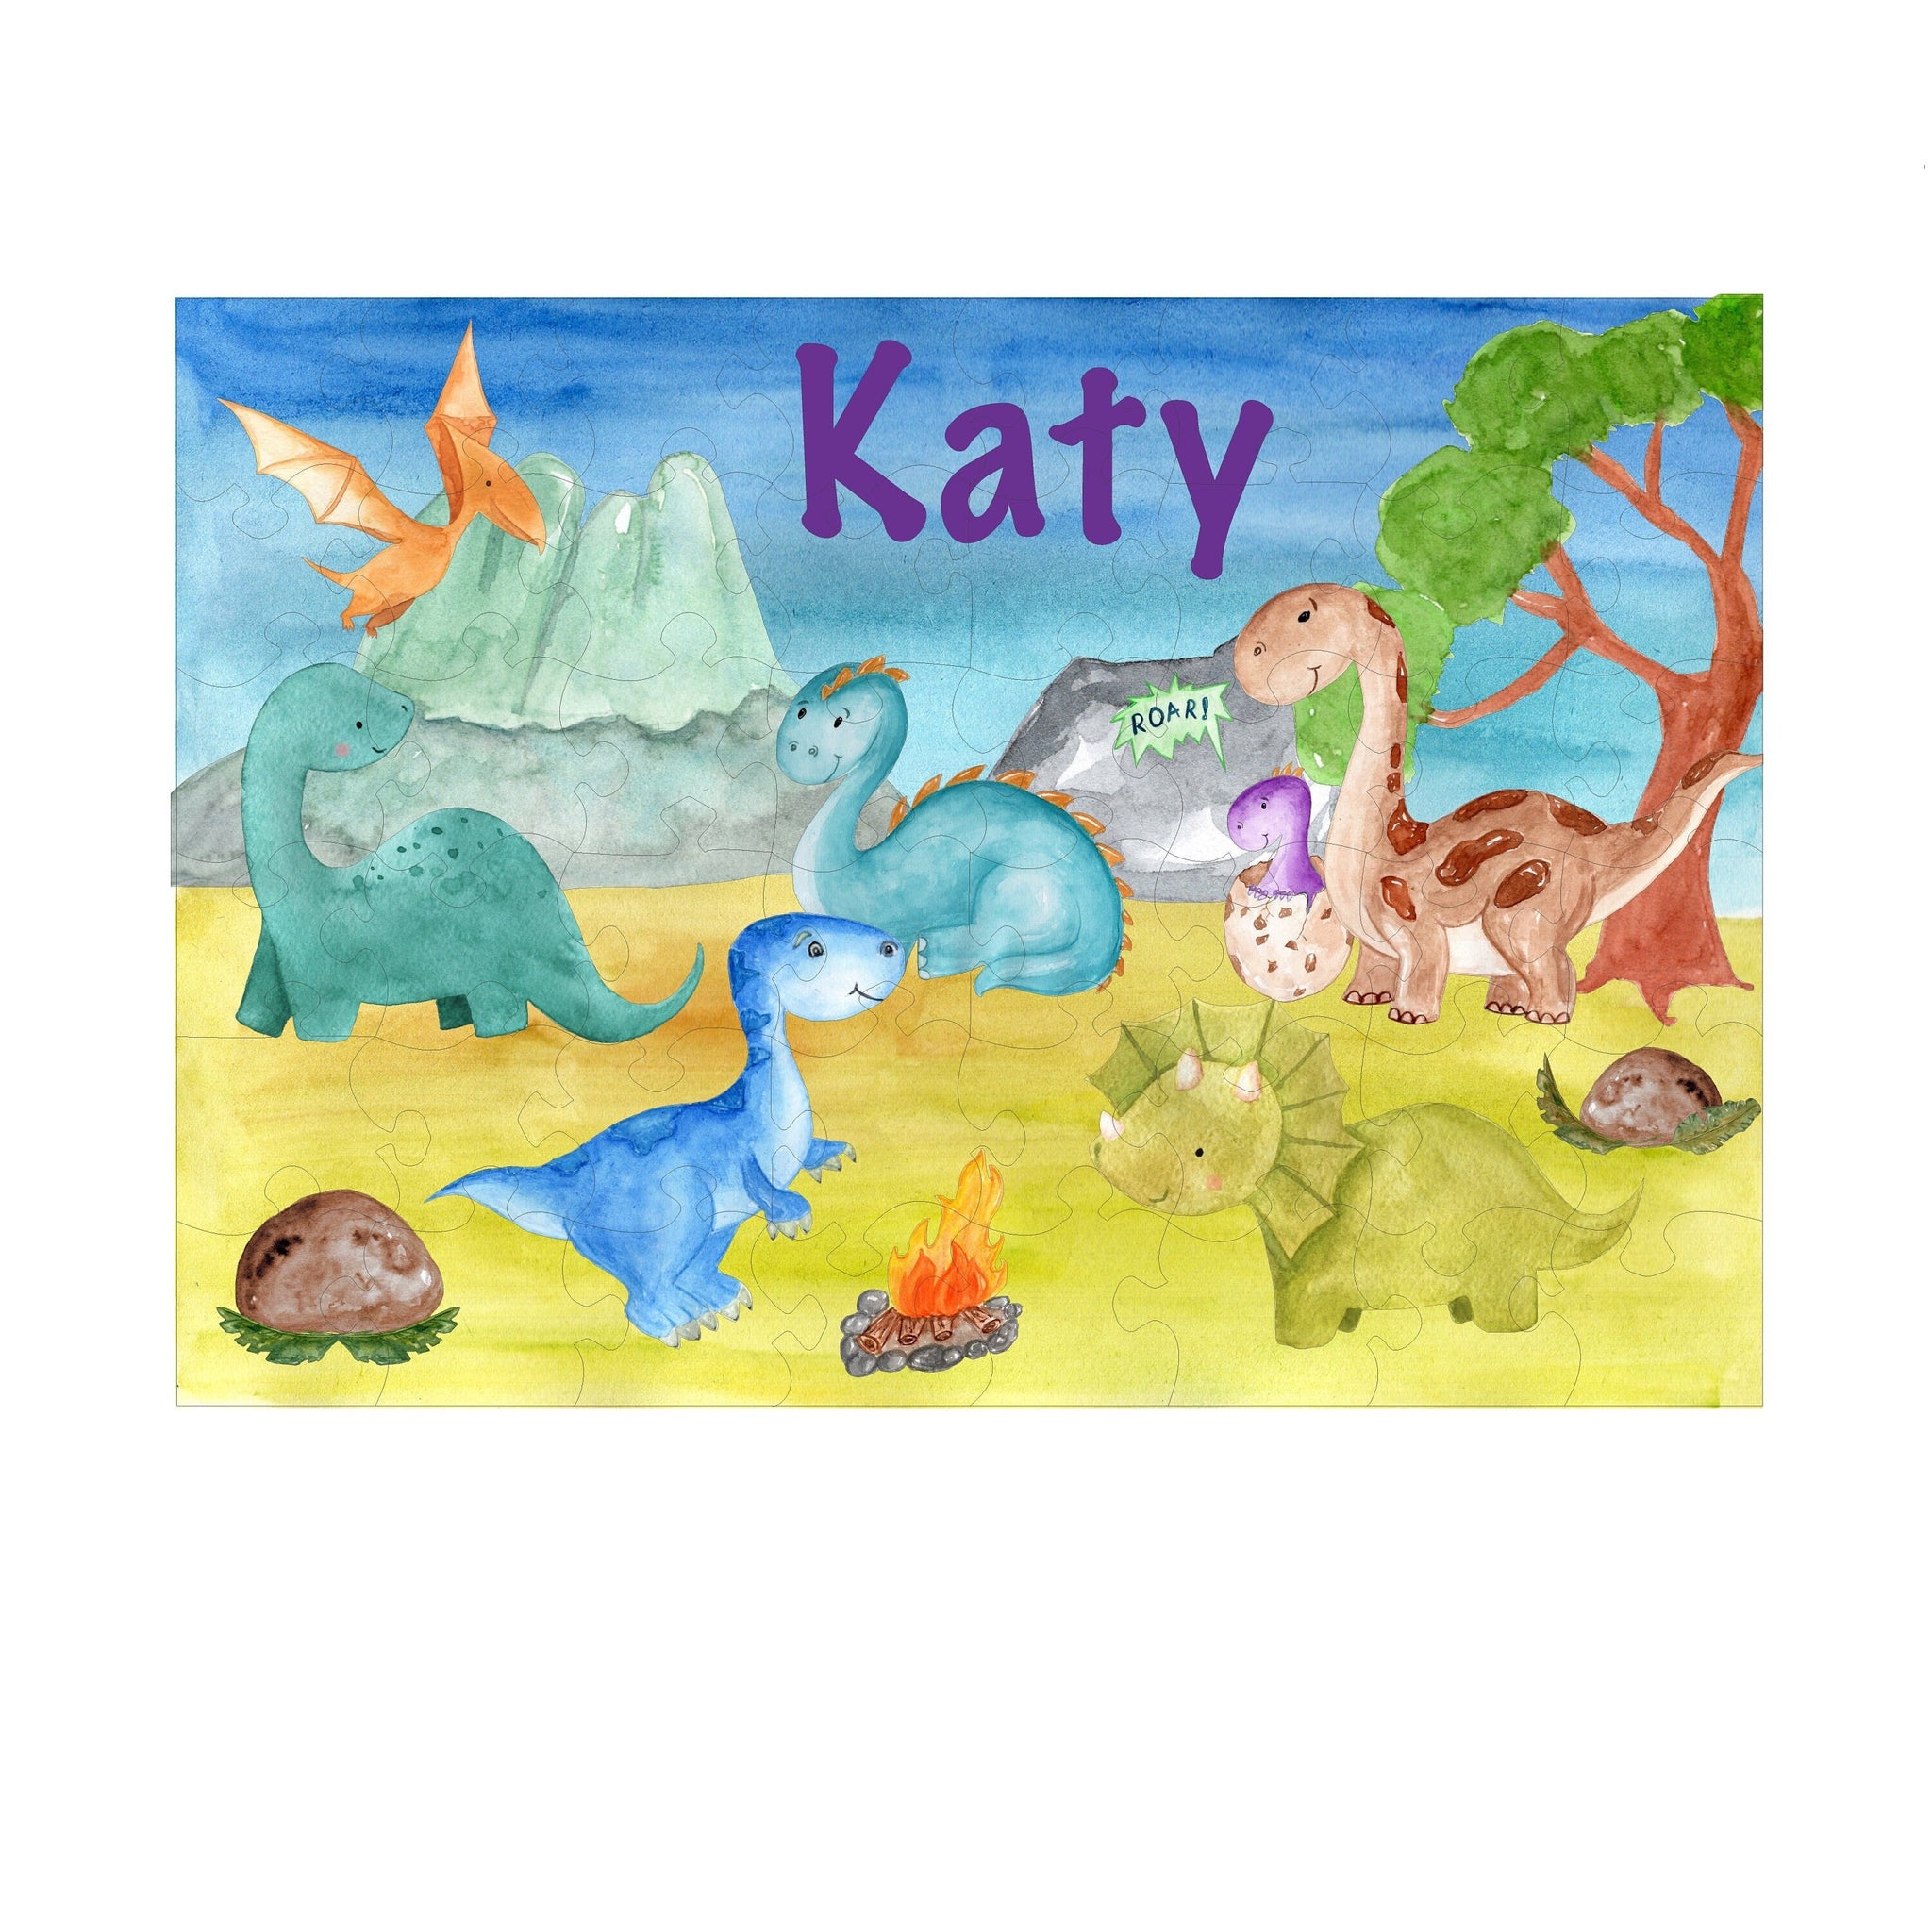 Personalized Puzzle, Kids Puzzles, Dinosaur Puzzle, Educational, Learning